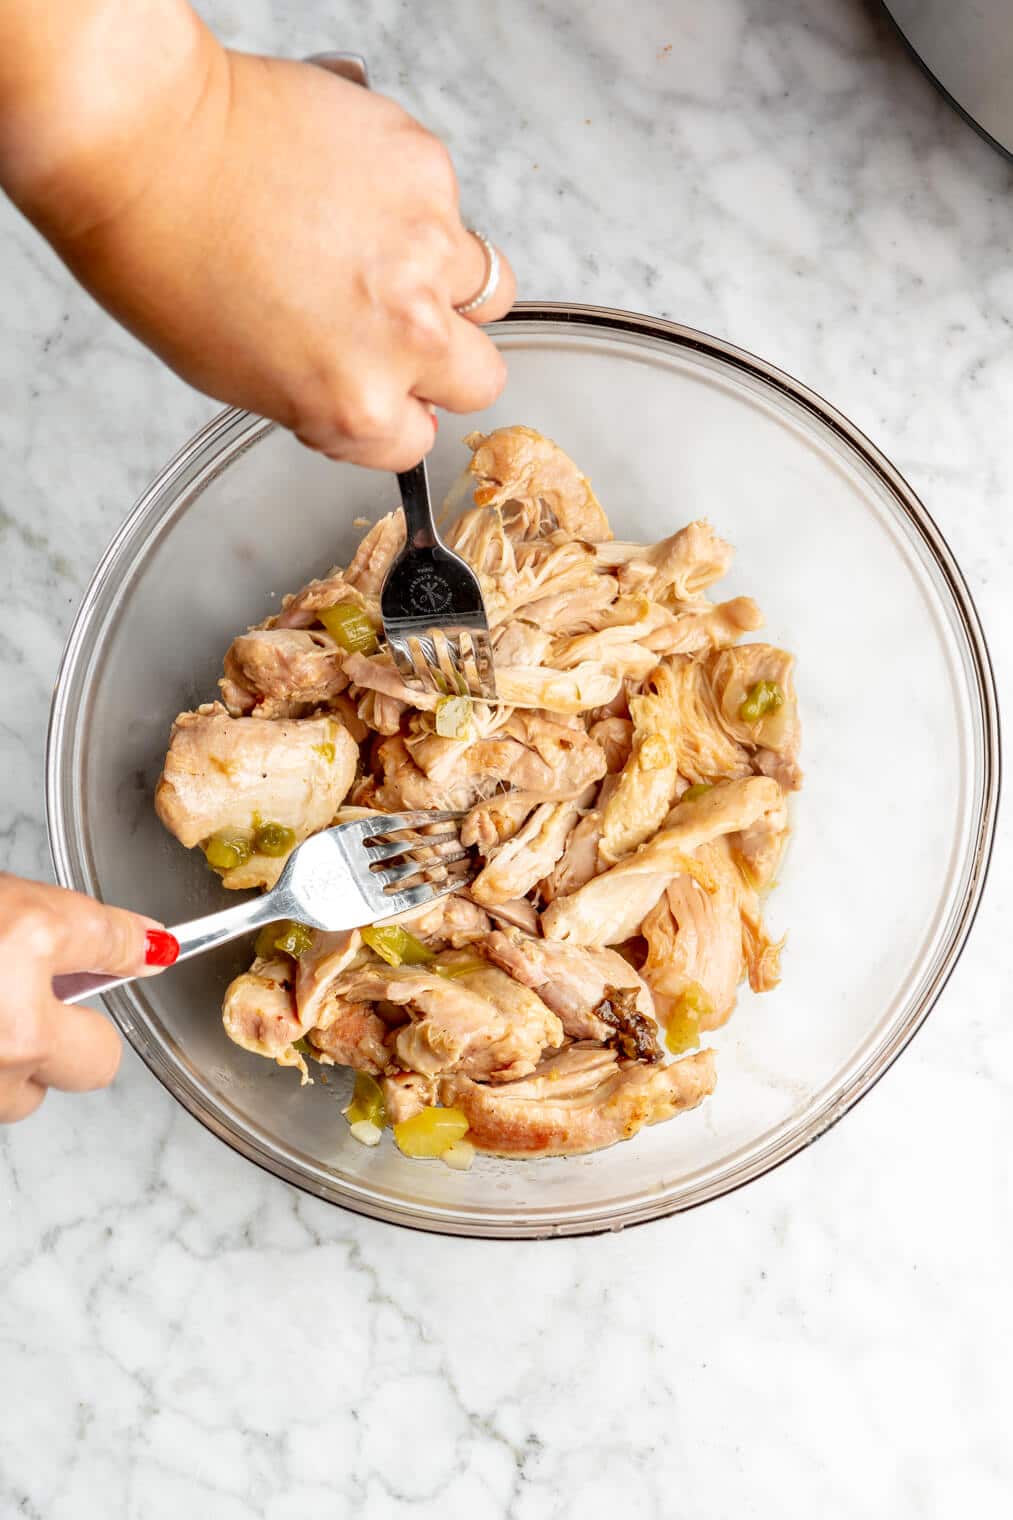 Hands using two forks to shred chicken in a glass bowl.